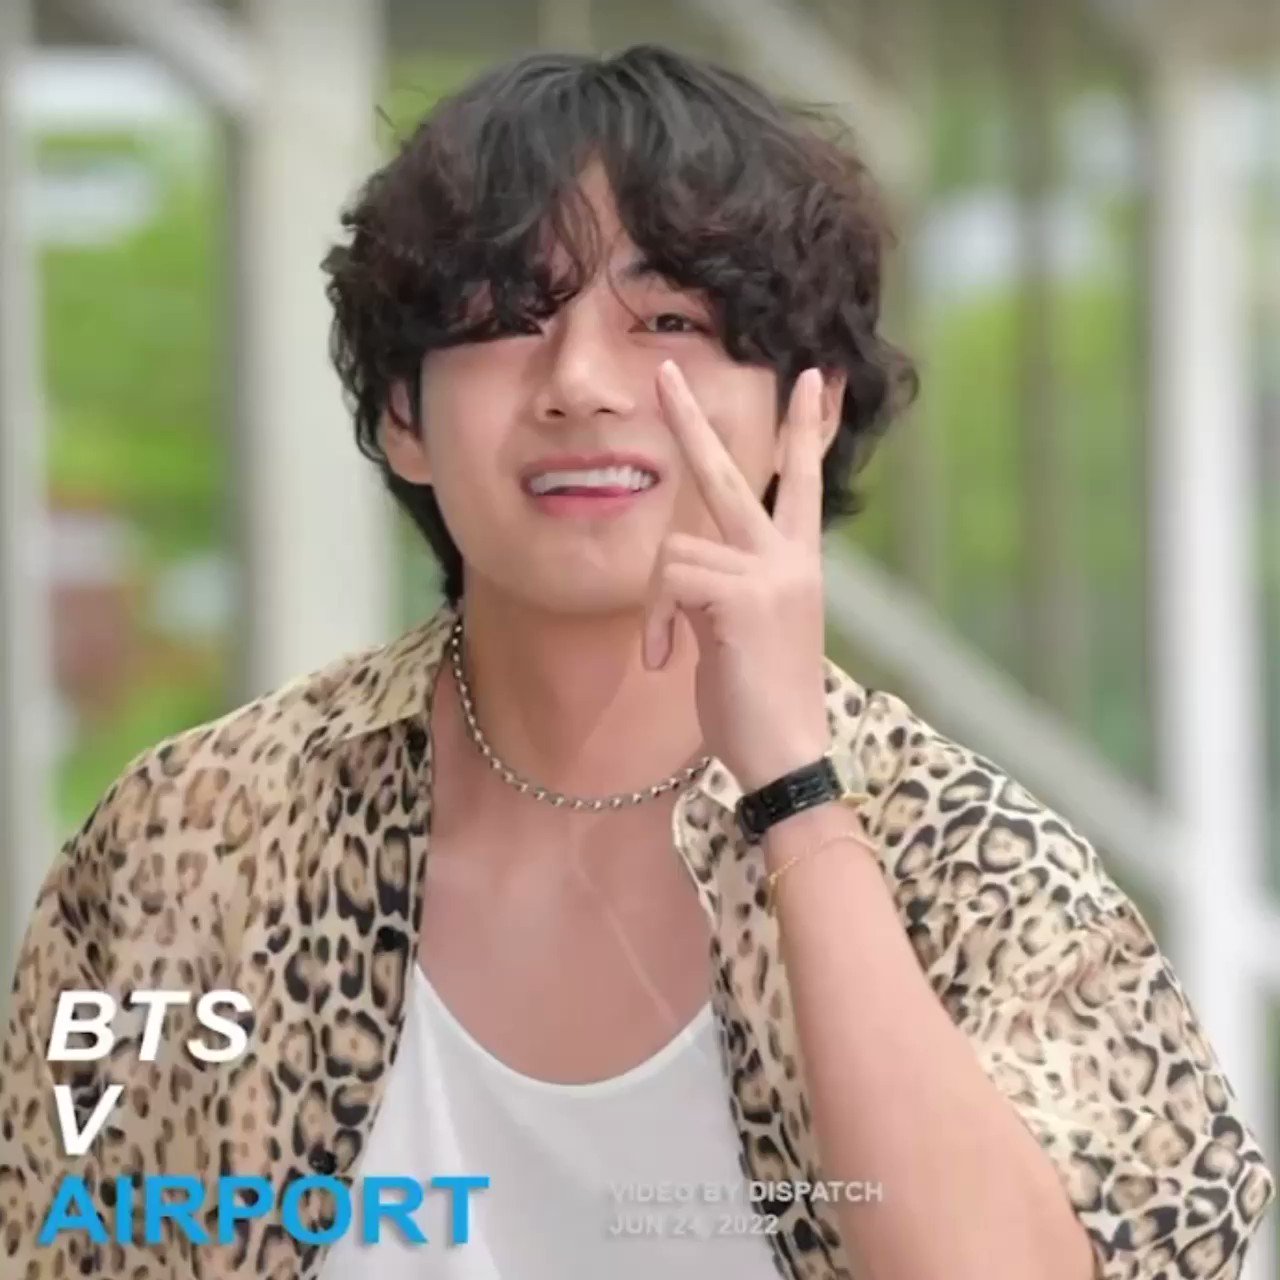 BTS Asian ARMY 2.0 - 08/30/19 GROUP BRACELET! Taehyung and his